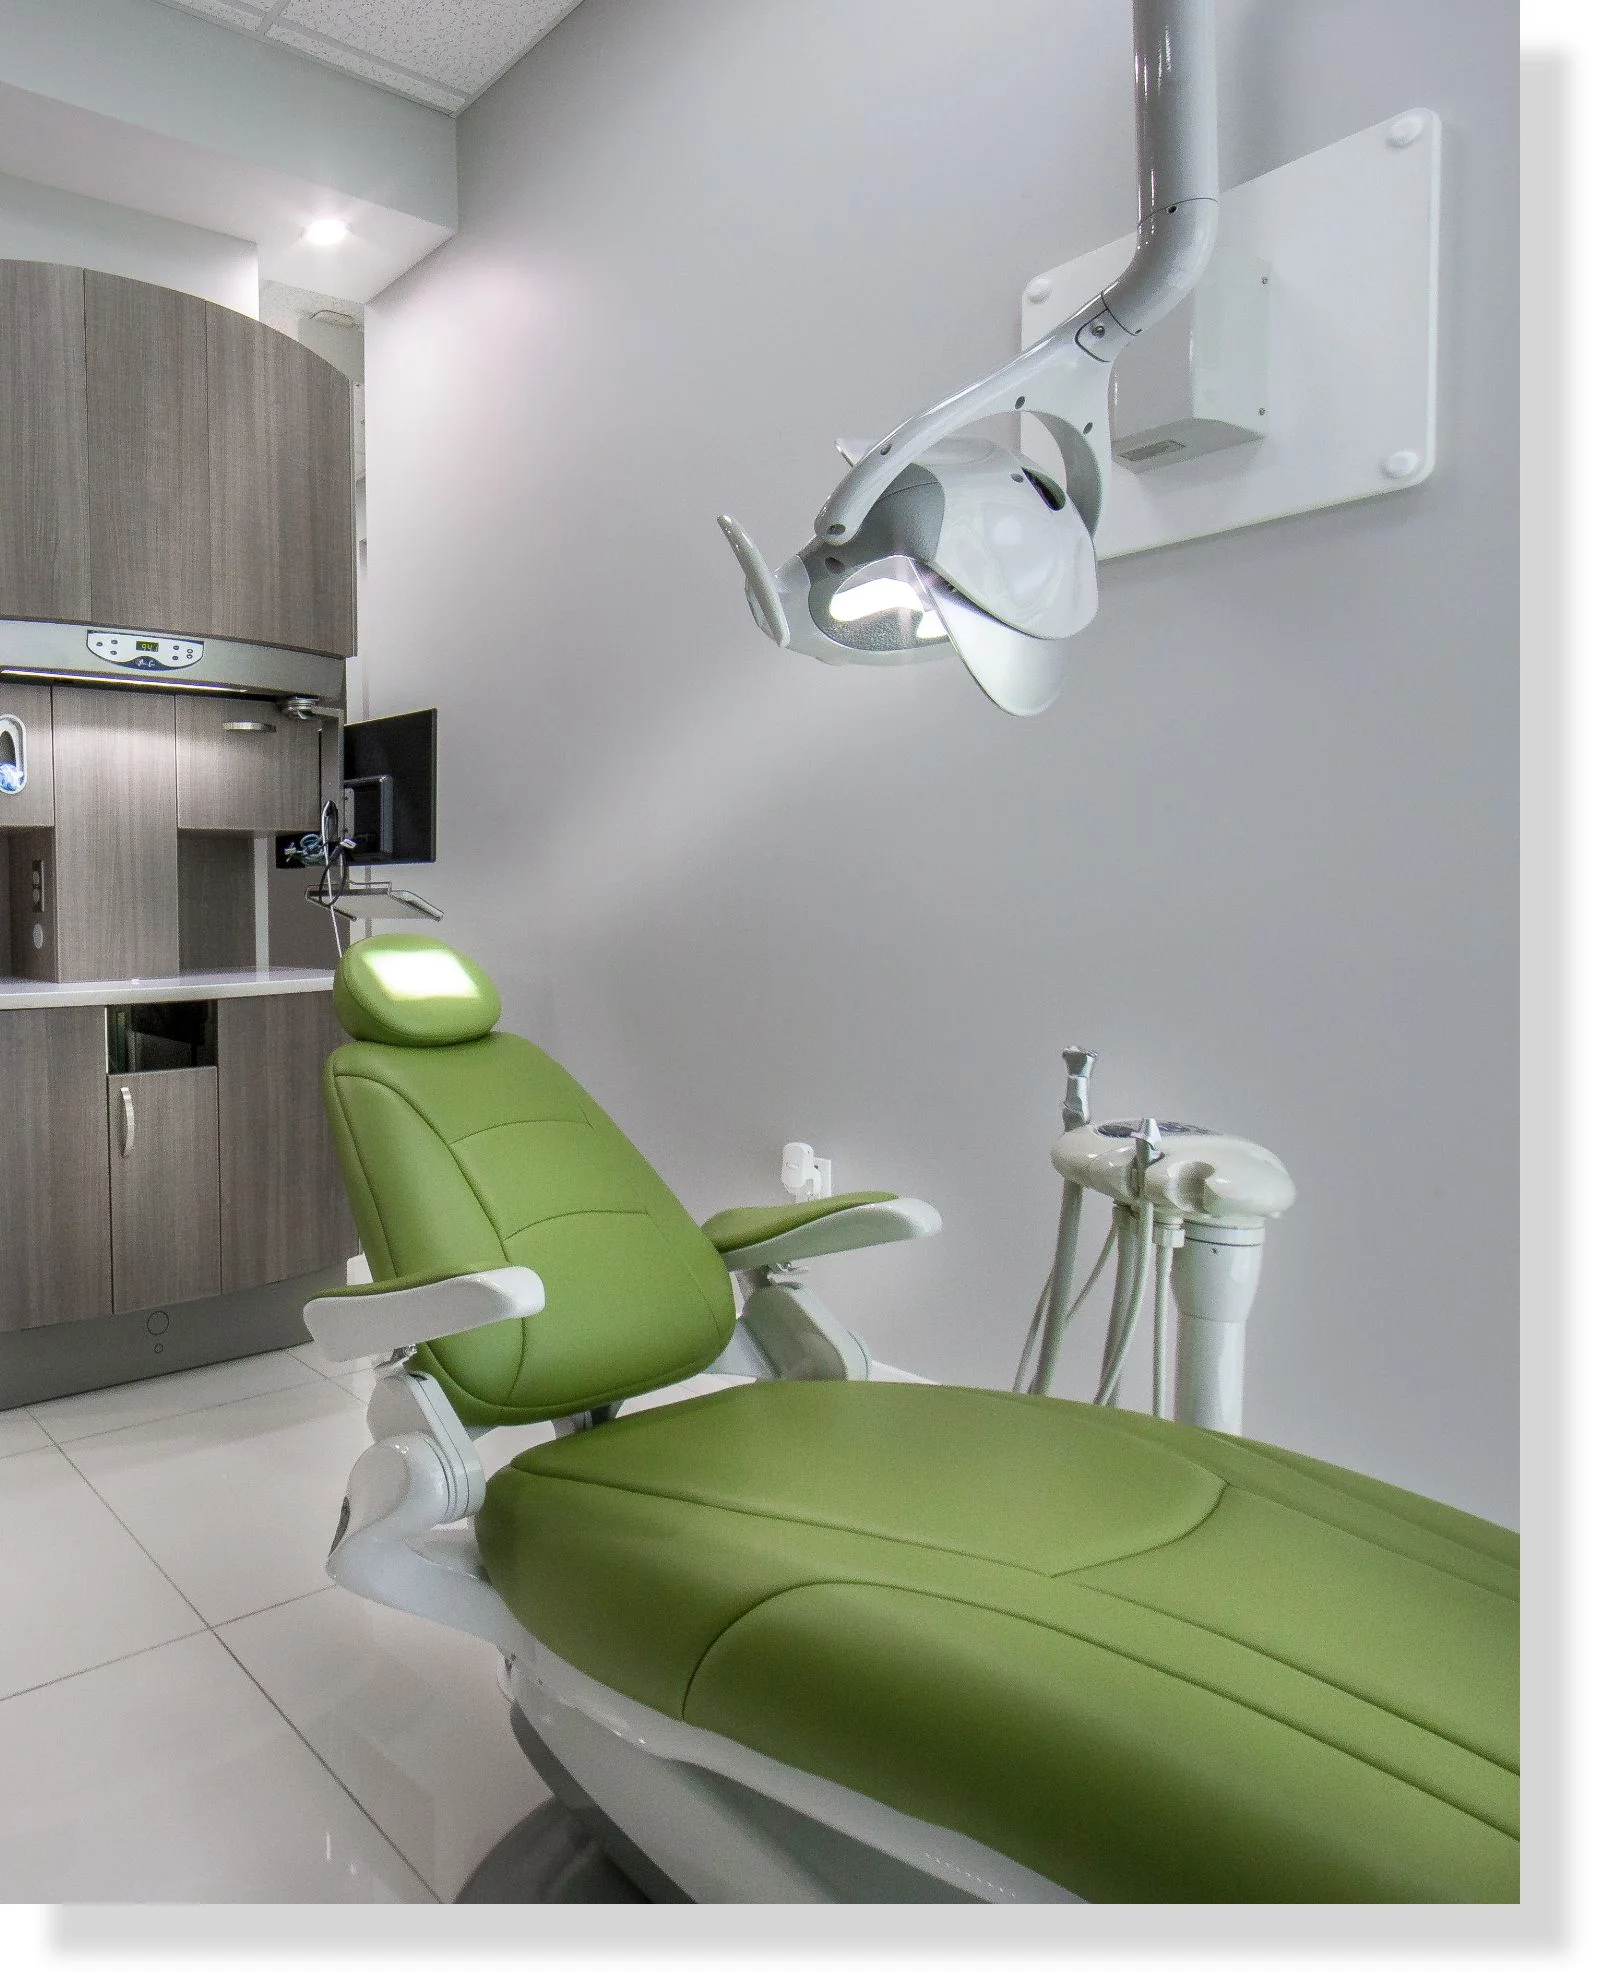 About Our Dental Clinic - The House of Dentistry